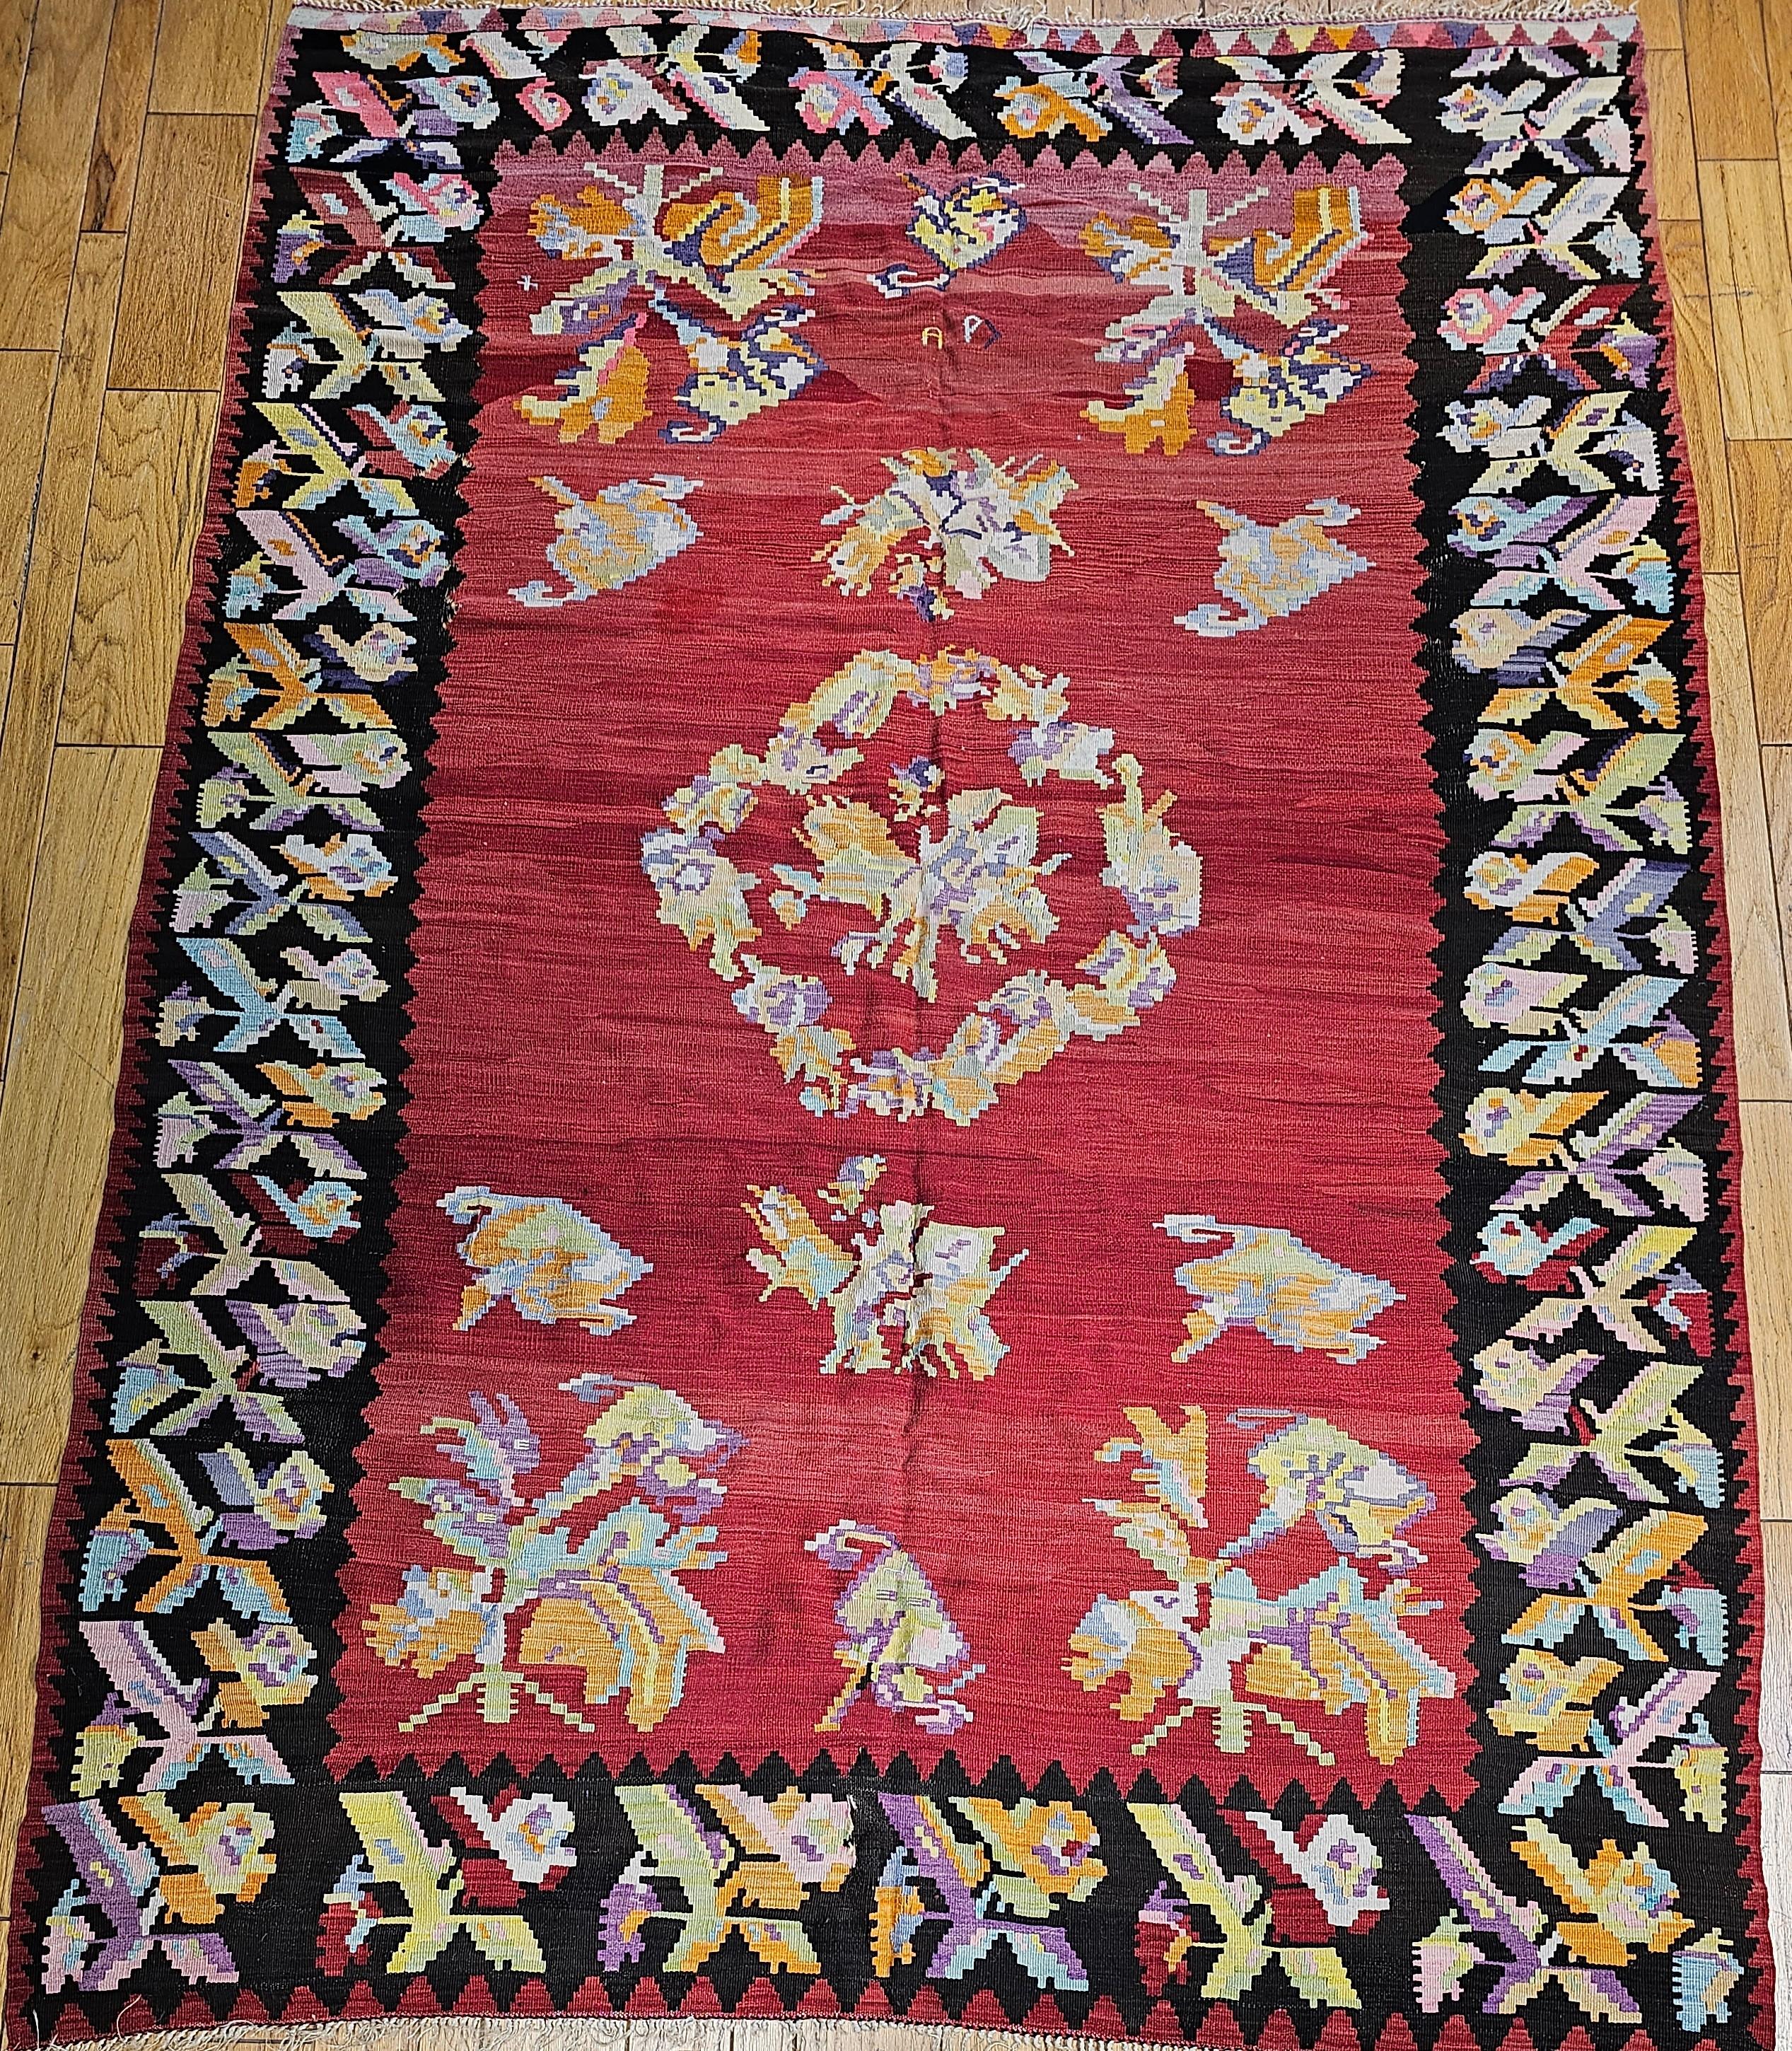  Vintage Karabagh Kilim room size rug with floral design and vibrant colors from the early 1900s.   The kilim has a bright and beautiful  floral pattern set in a brilliant red field.  The floral design colors include bright red, green, ivory, black,